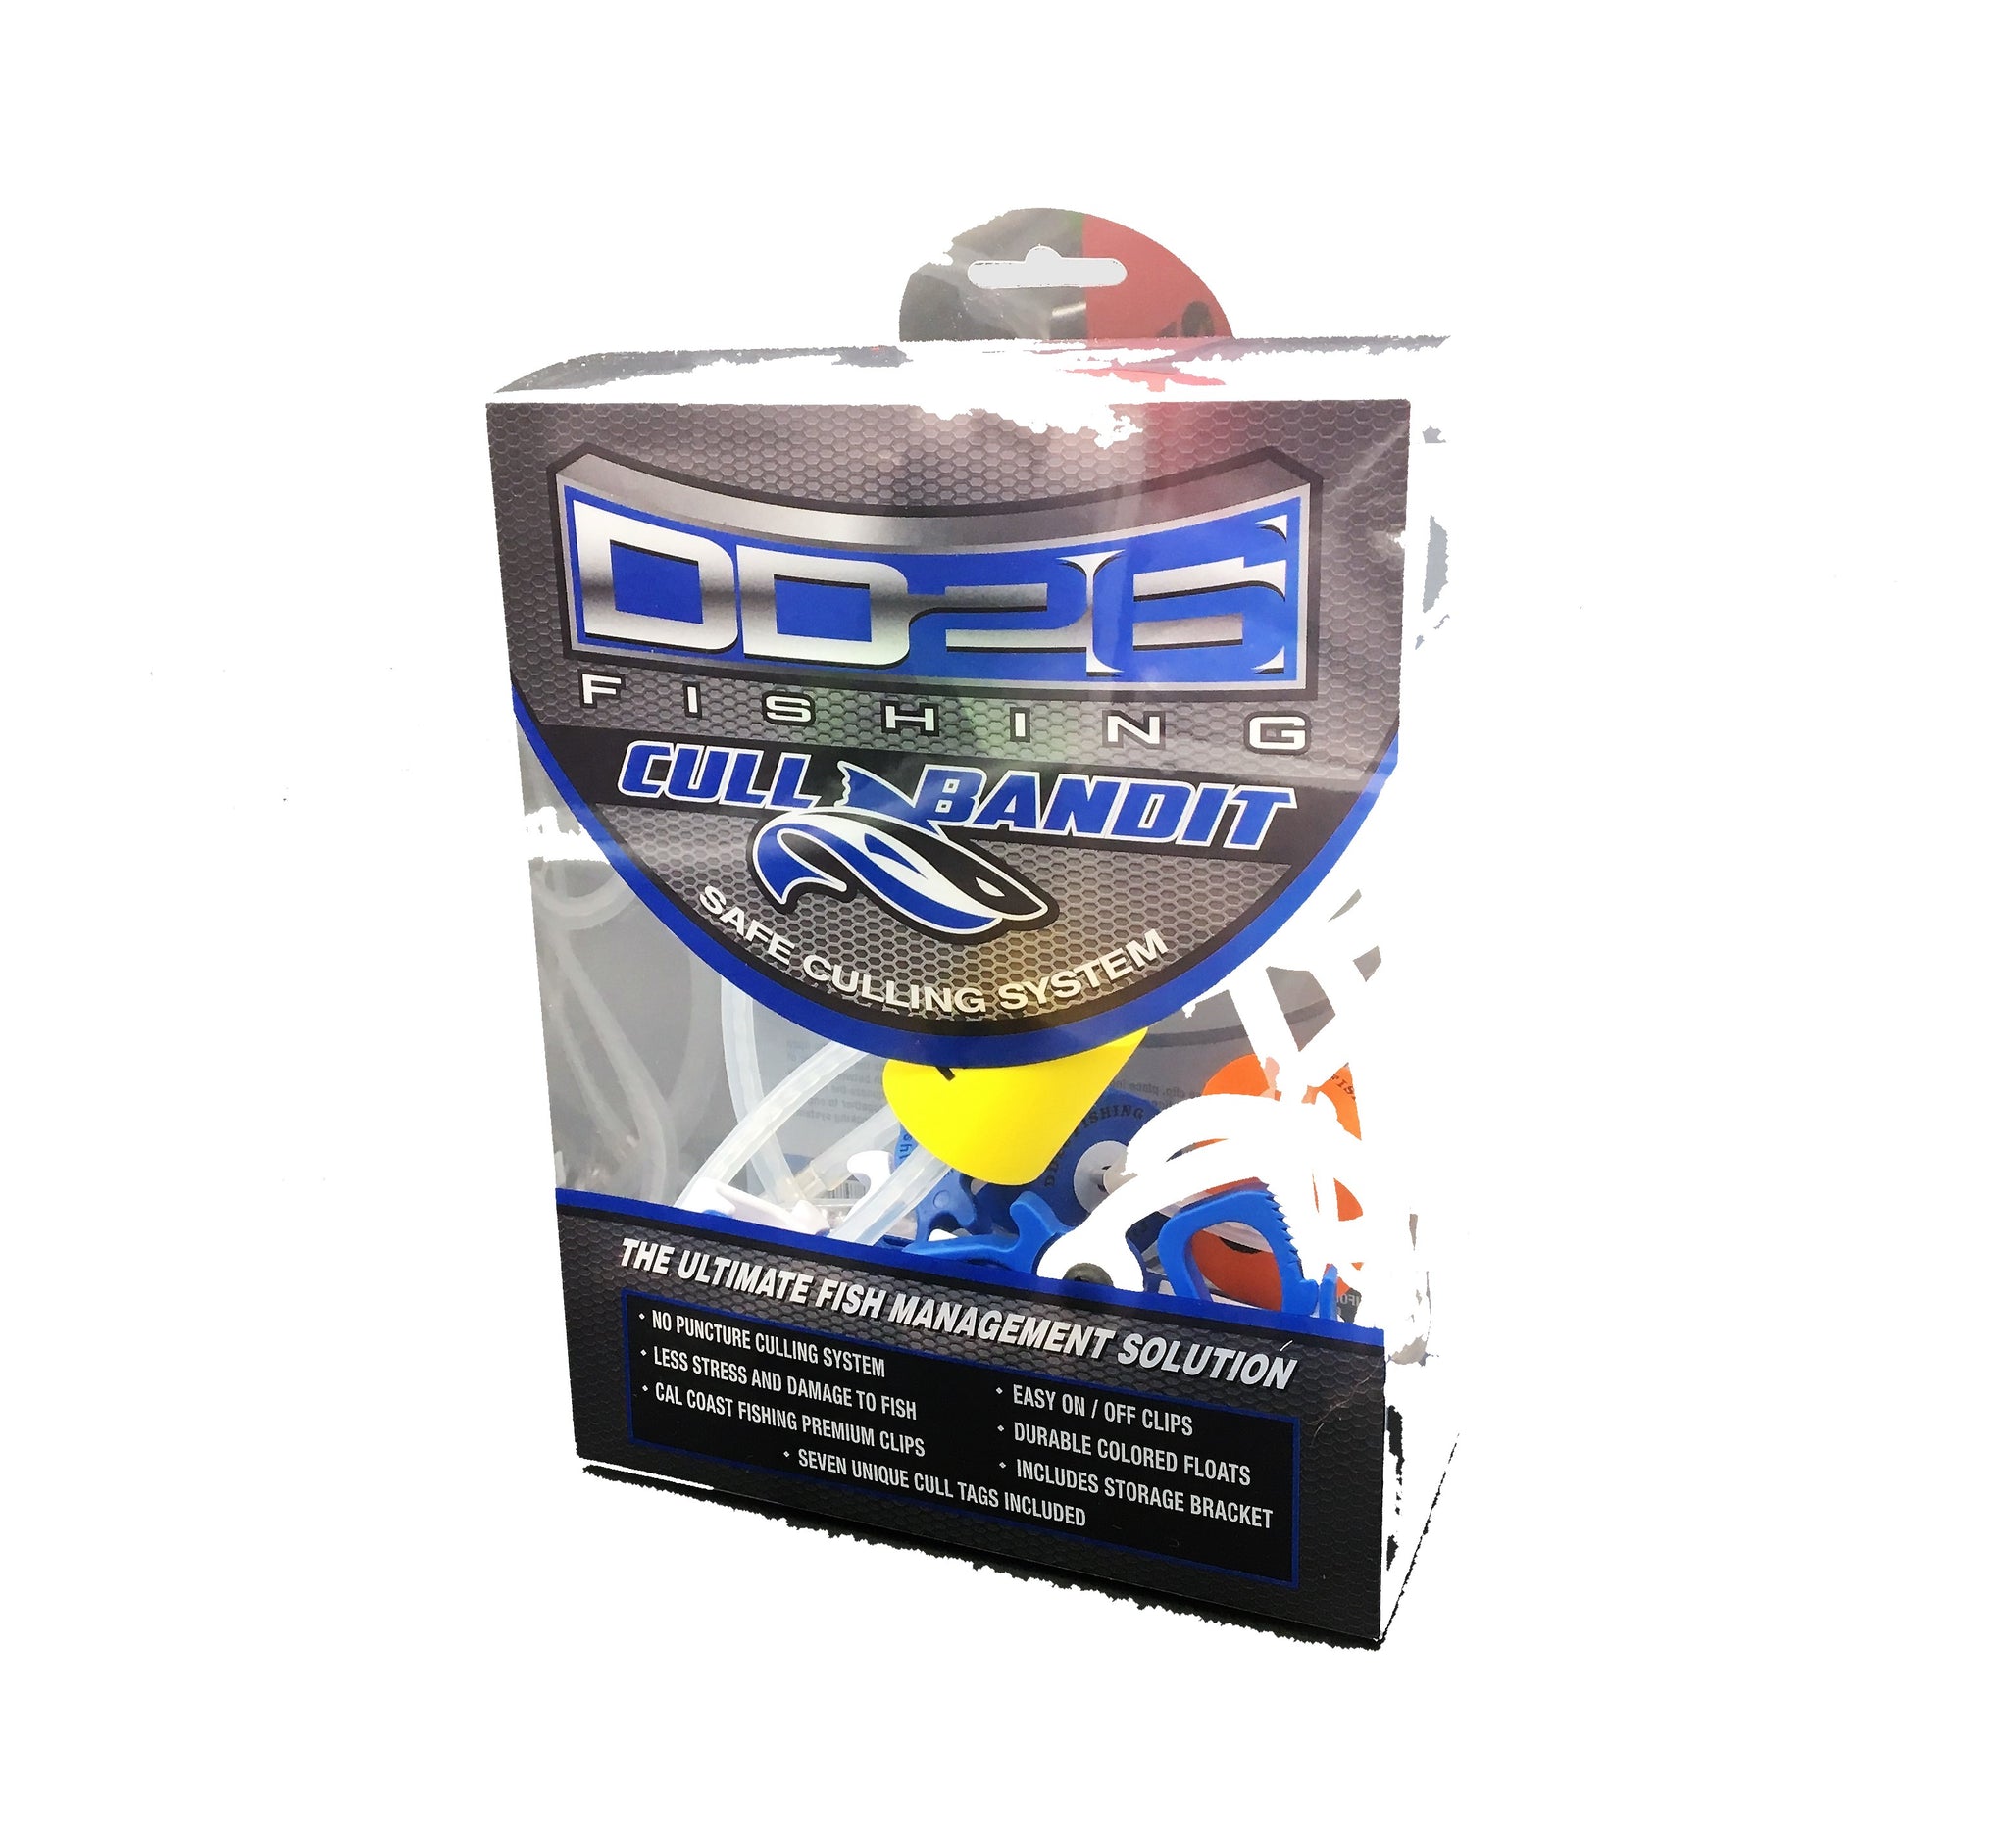 DD26 Cull Tags Tournament culling system for bass fishing